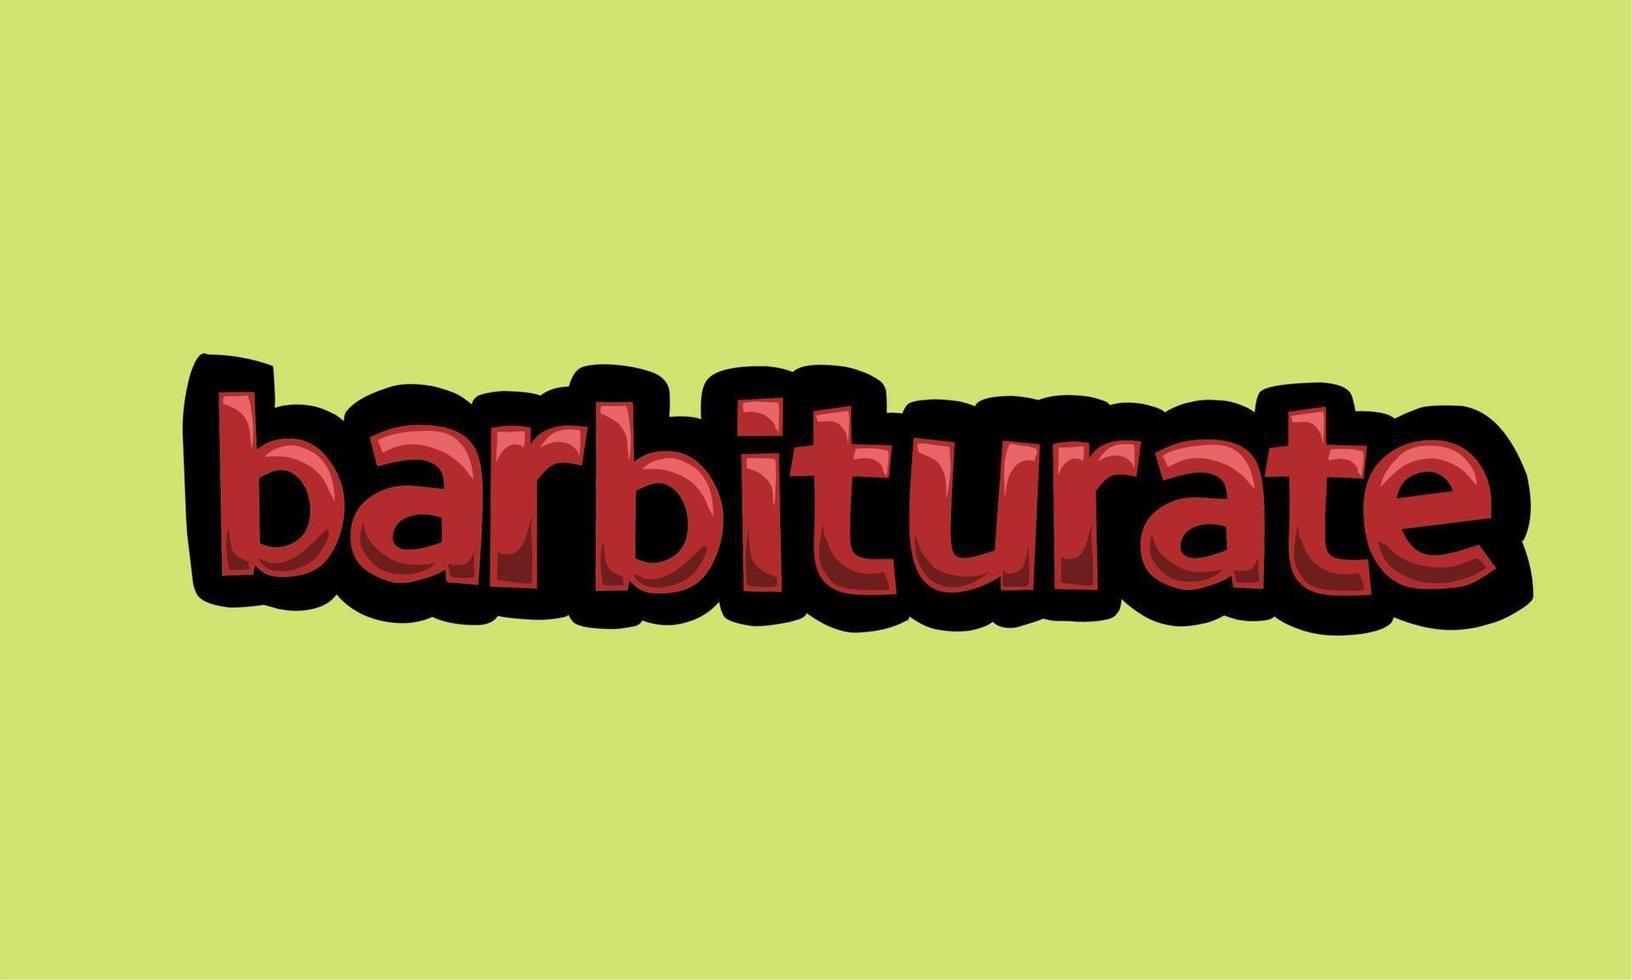 barbiturate writing vector design on a green background